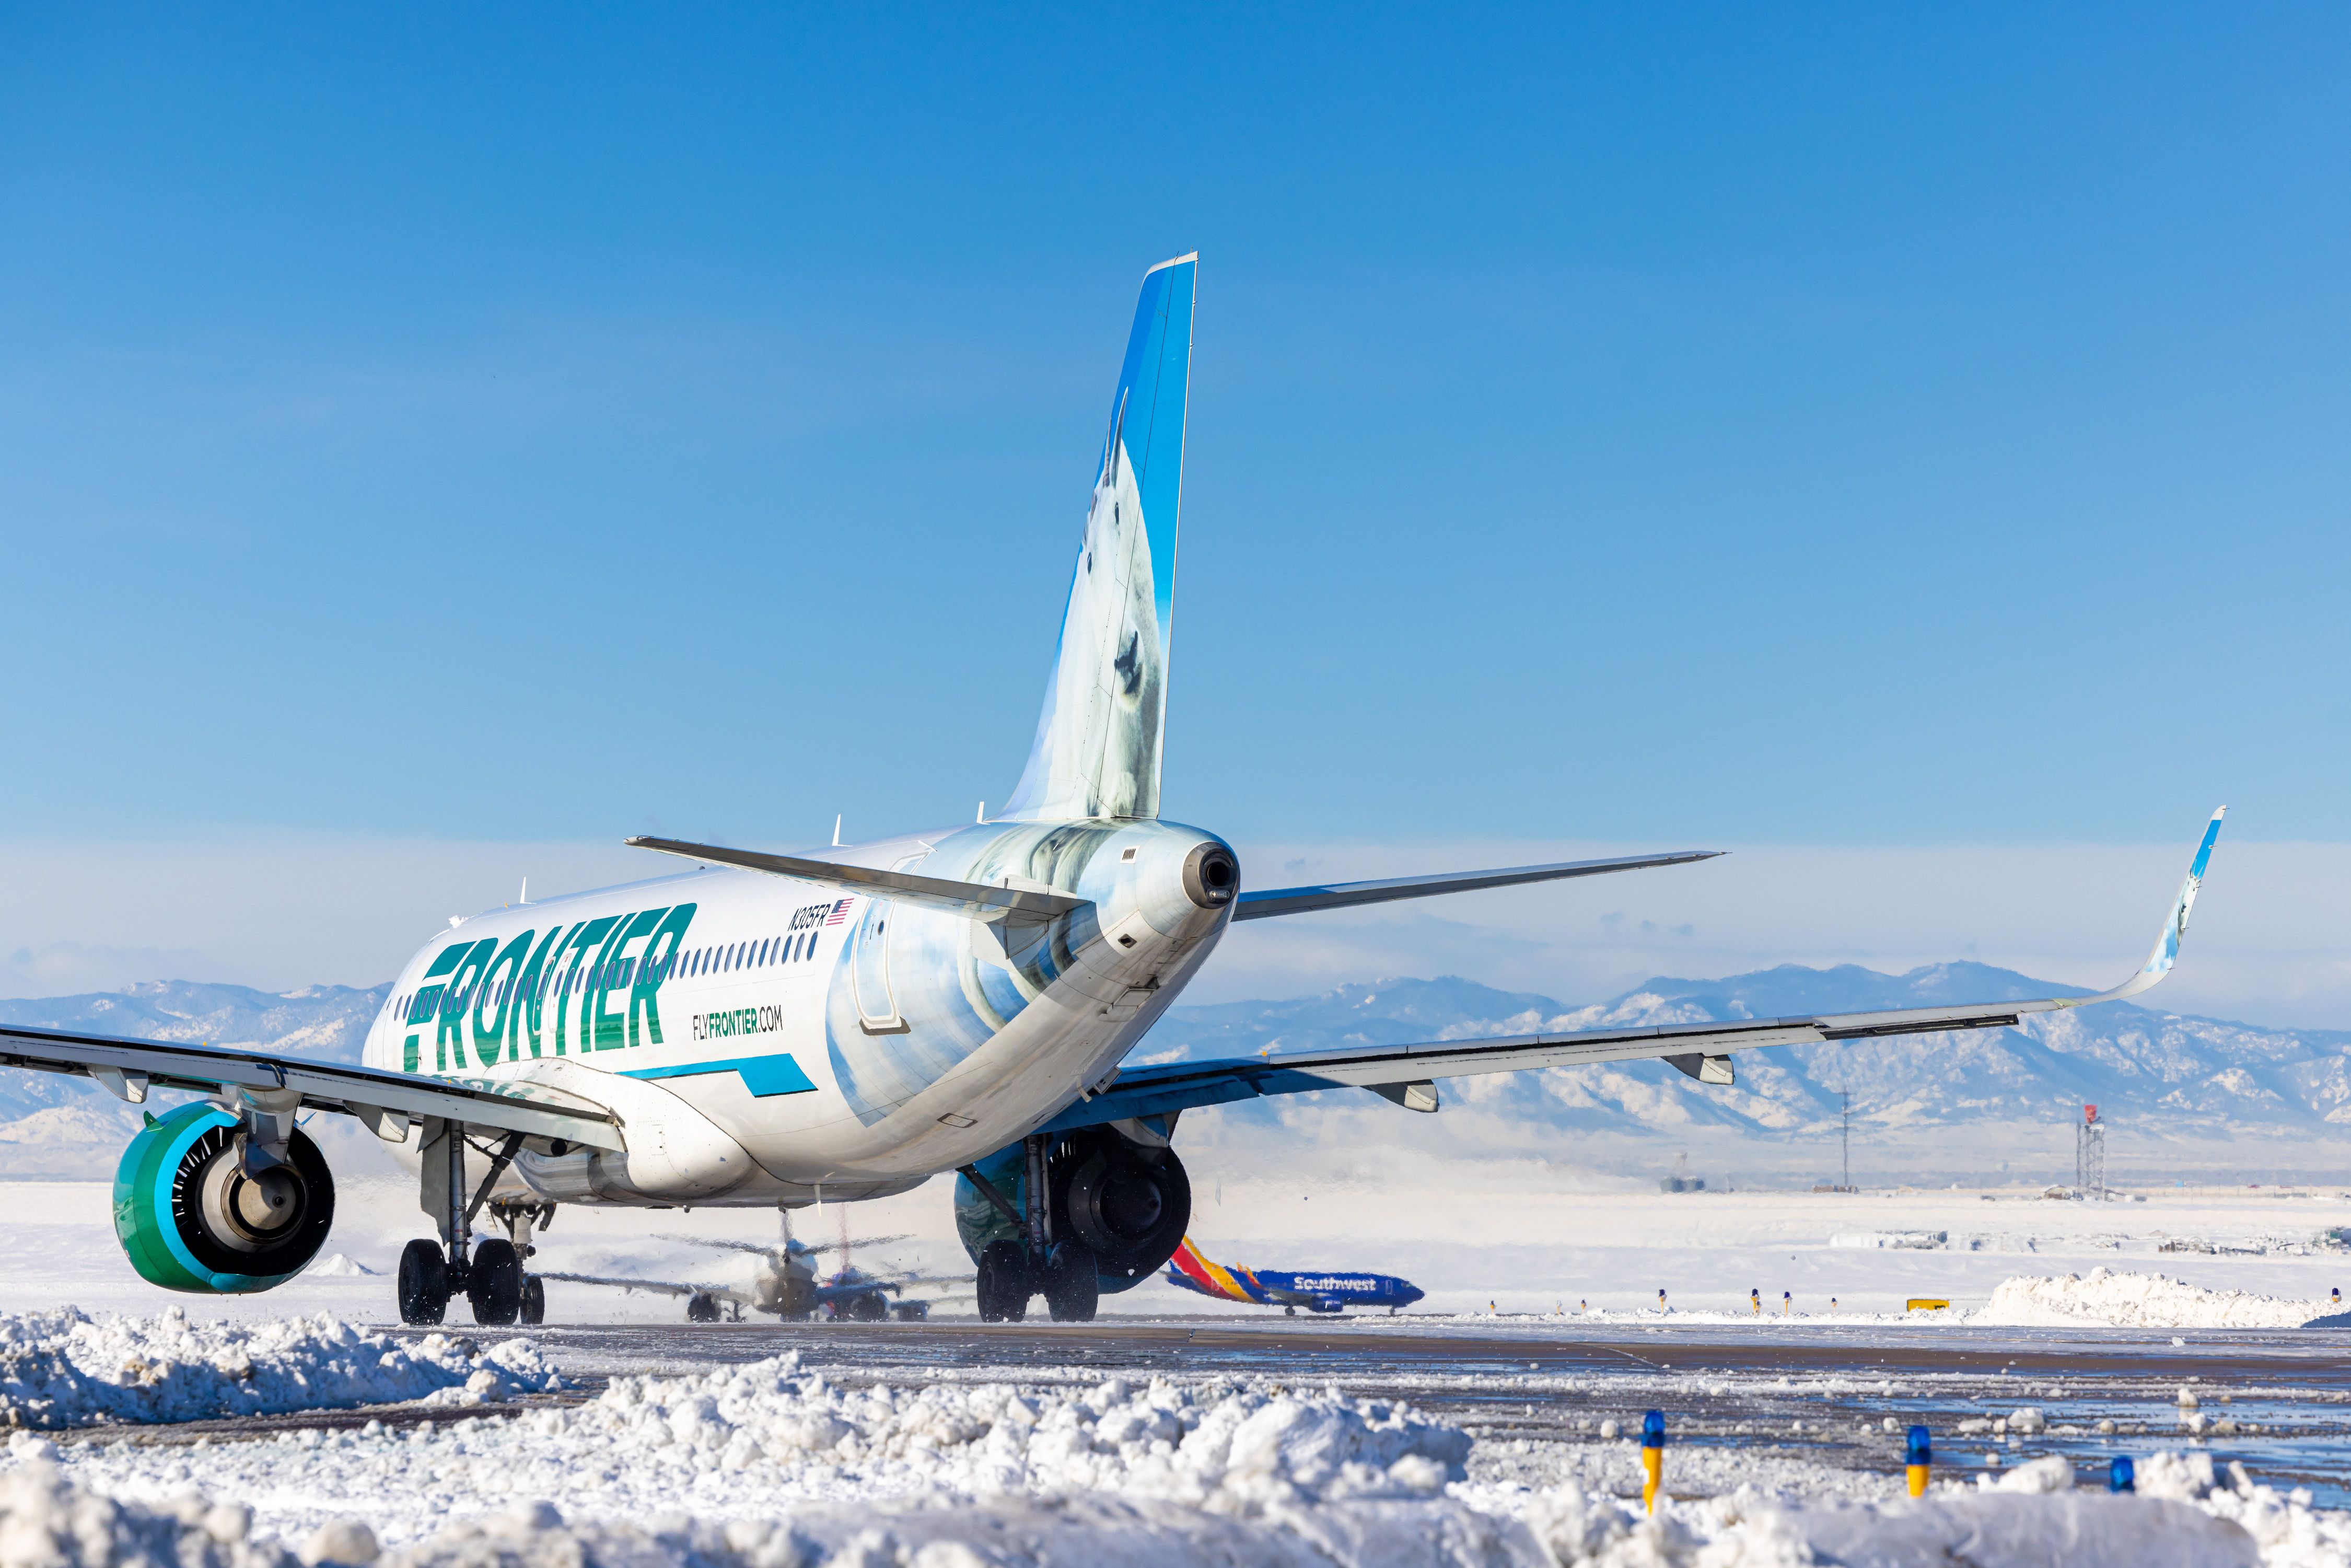 A Frontier Airlines plane in the snow